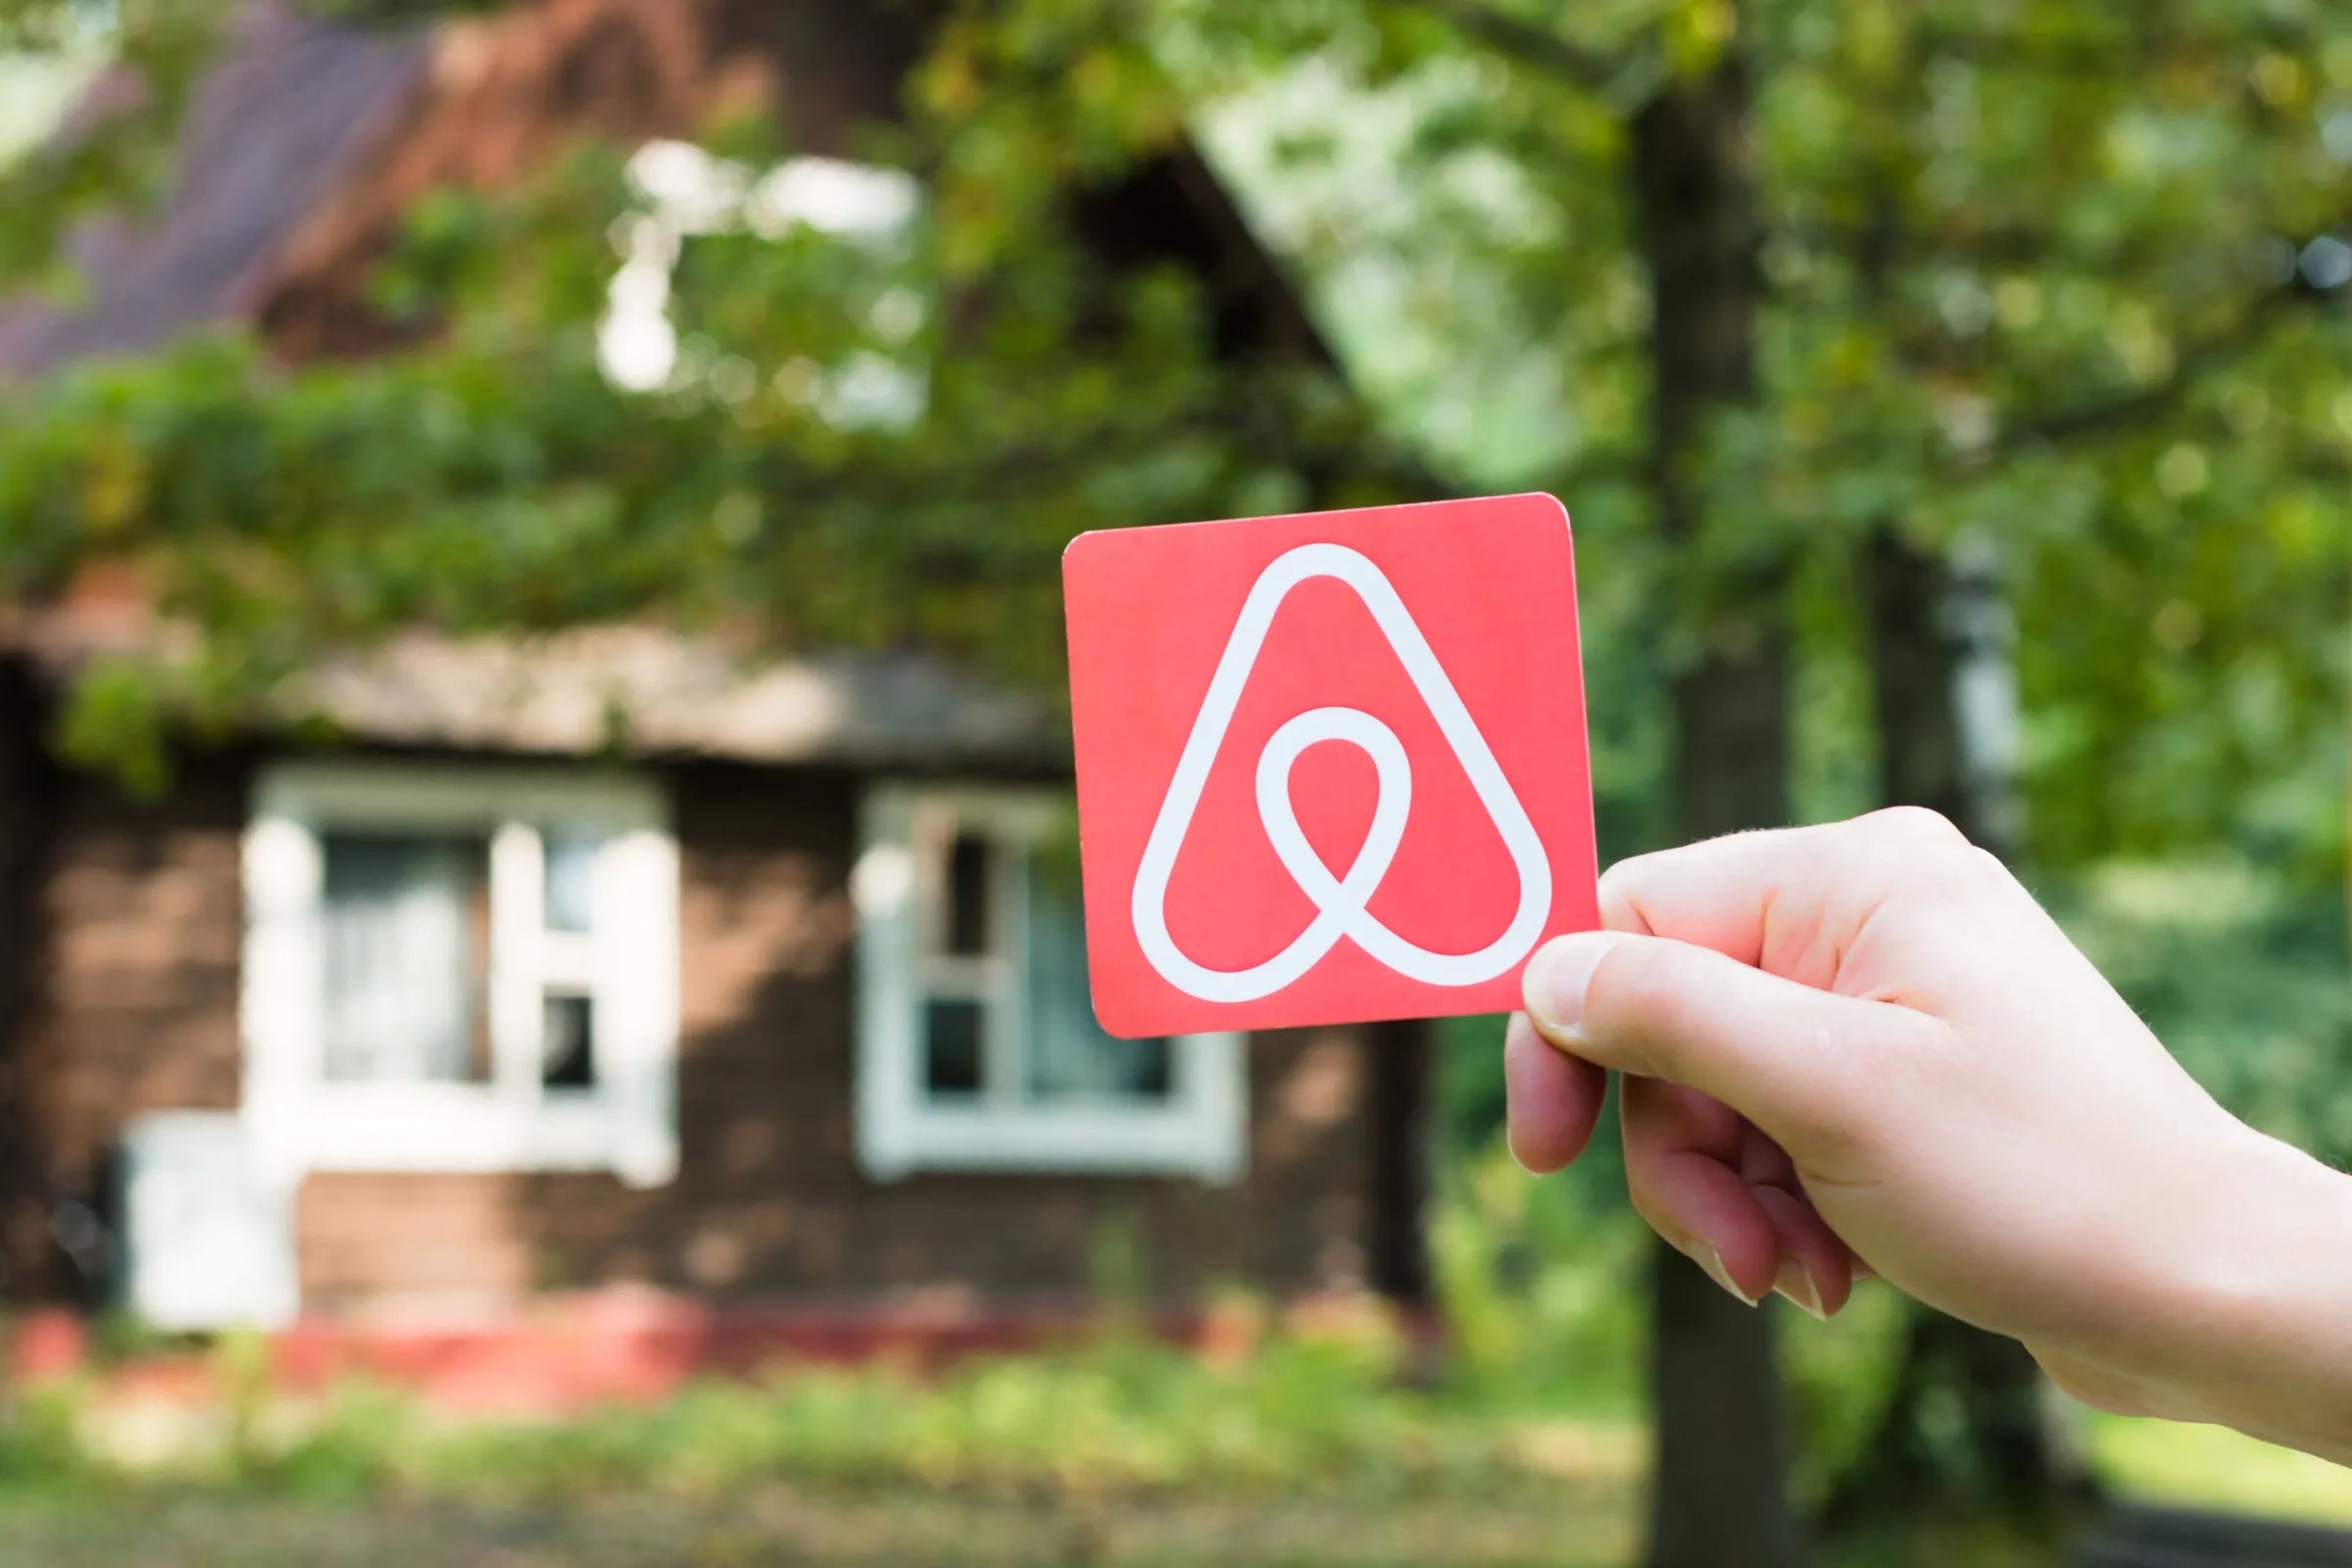 An Airbnb logo held up in front of a rental property.